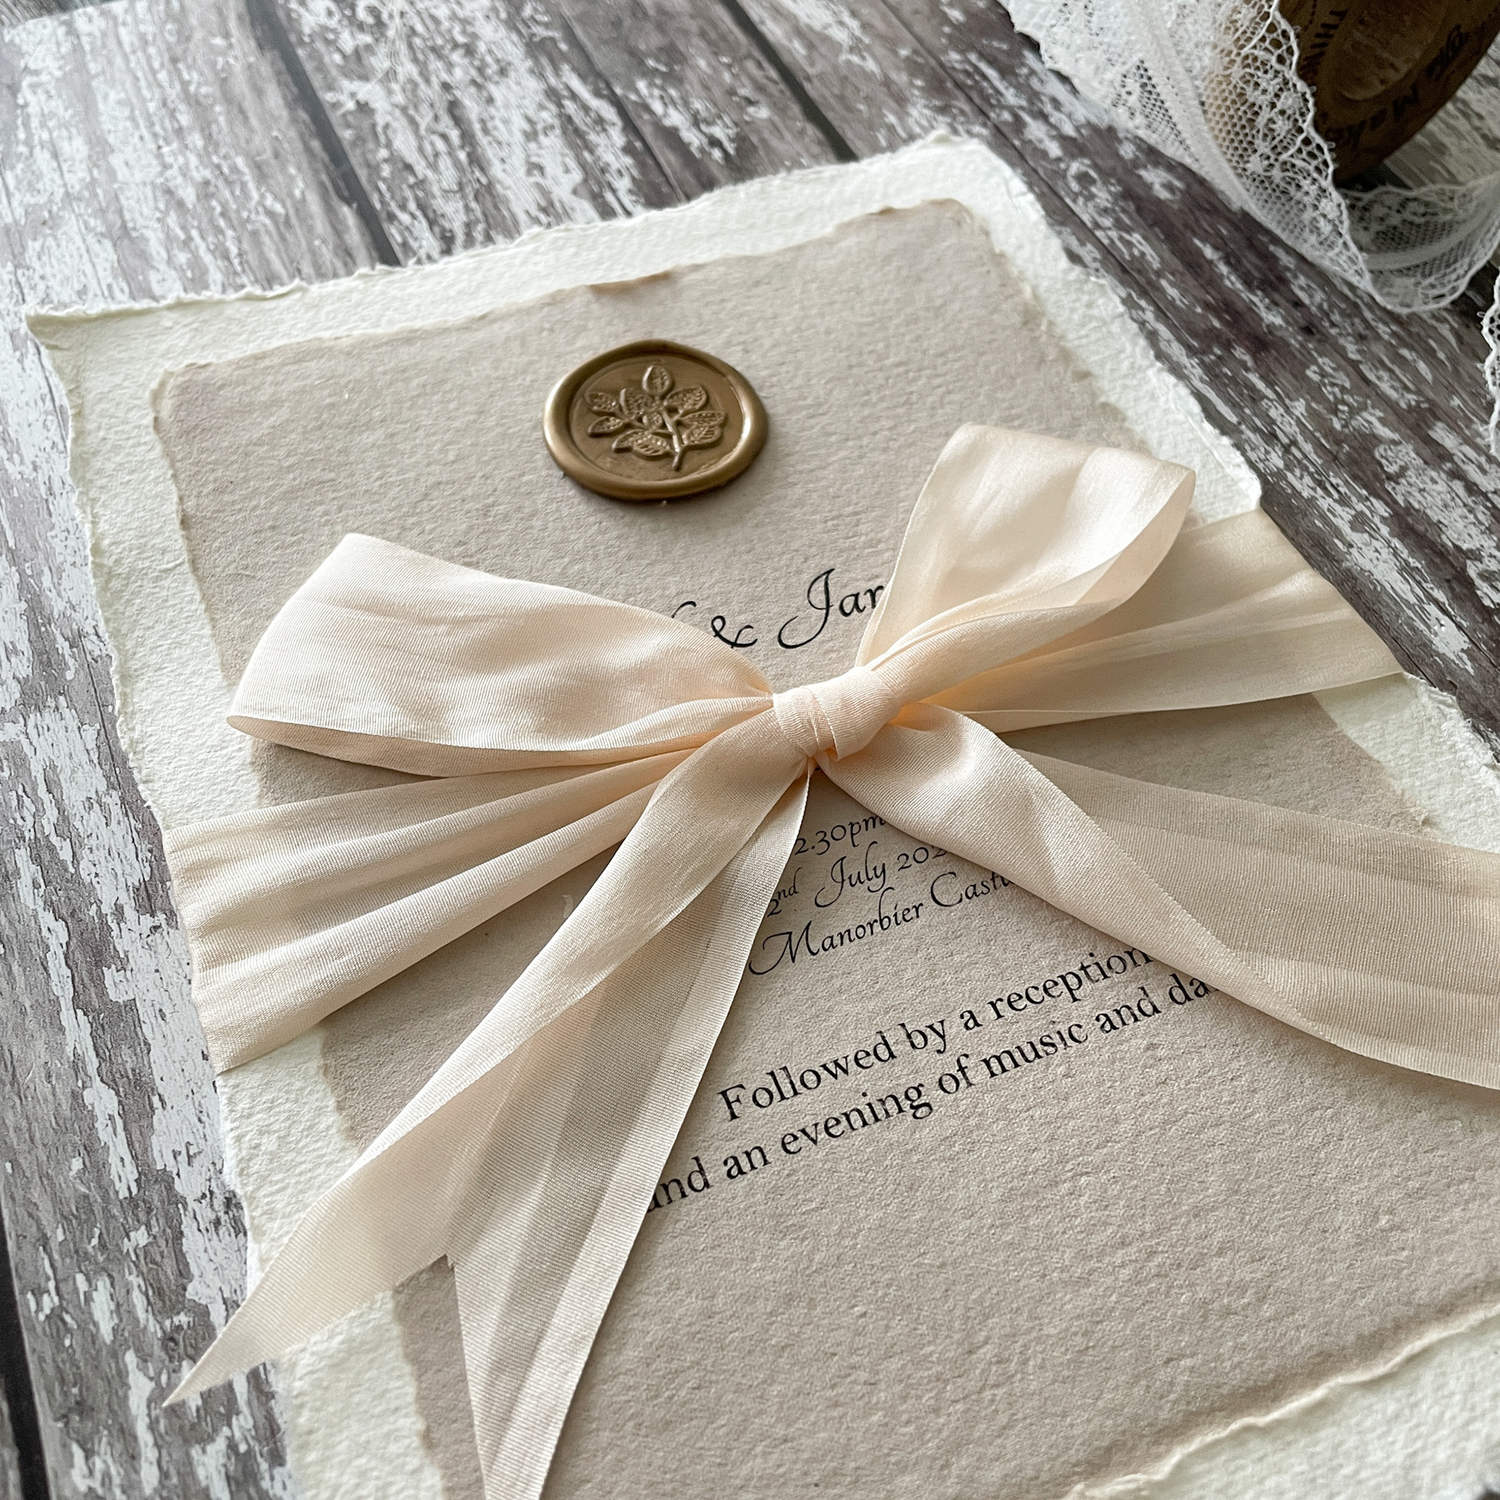 hand made wedding invitation made with recycled paper and natural materials.  Hand made paper invitation with wax seal and silk ribbon.  Luxury wedding invitations in natural colours and materials. Designed by Leah Lewis at The Natural Paper Company